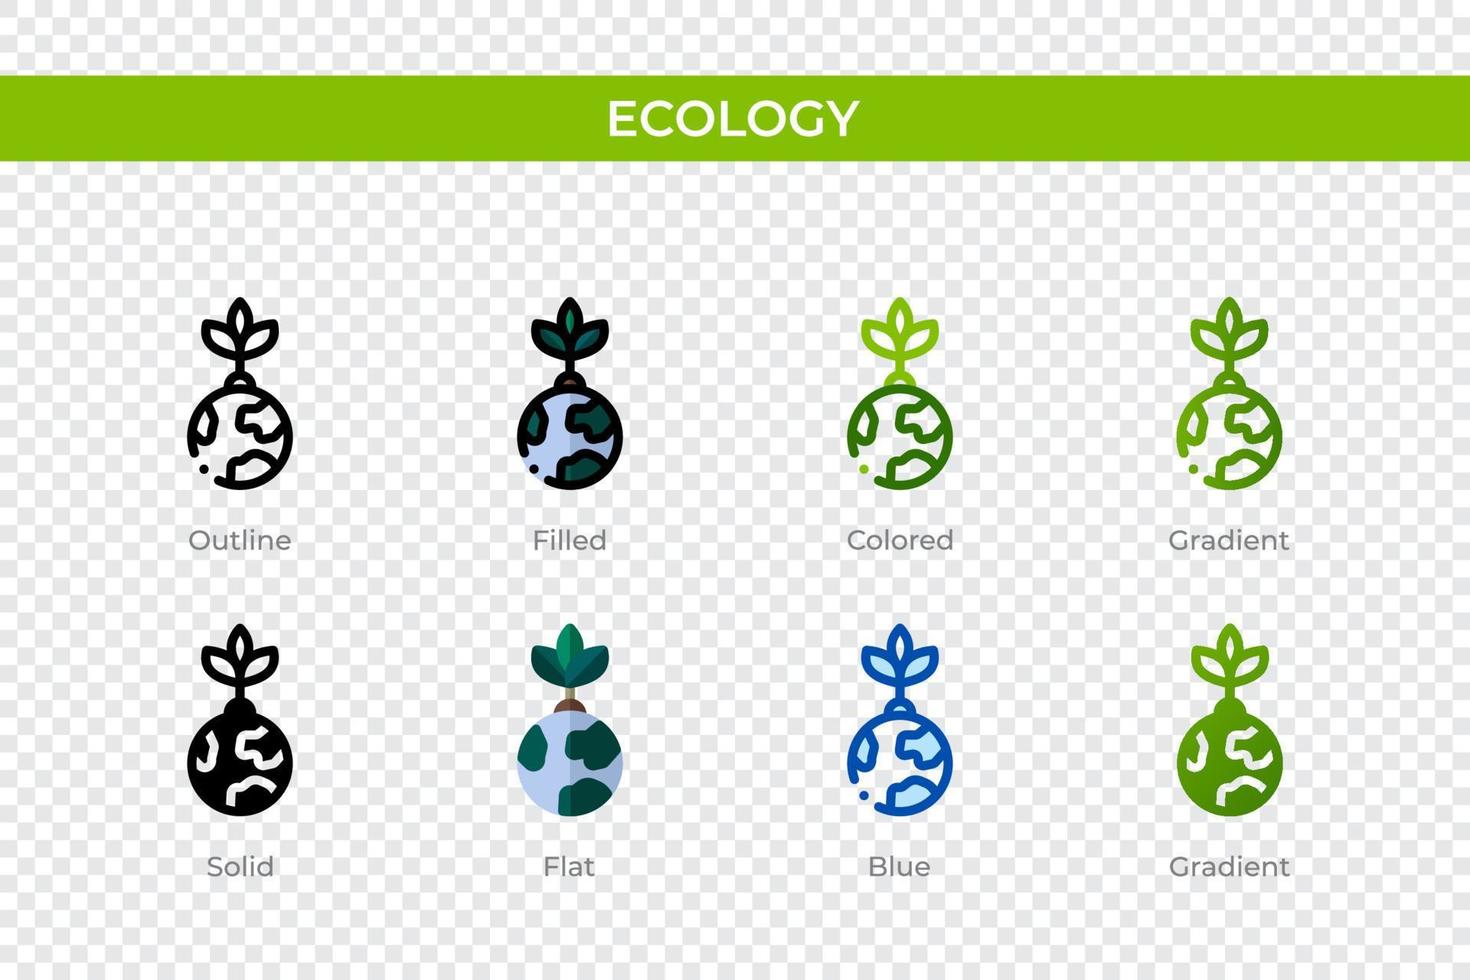 Ecology icon in different style. Ecology vector icons designed in outline, solid, colored, filled, gradient, and flat style. Symbol, logo illustration. Vector illustration